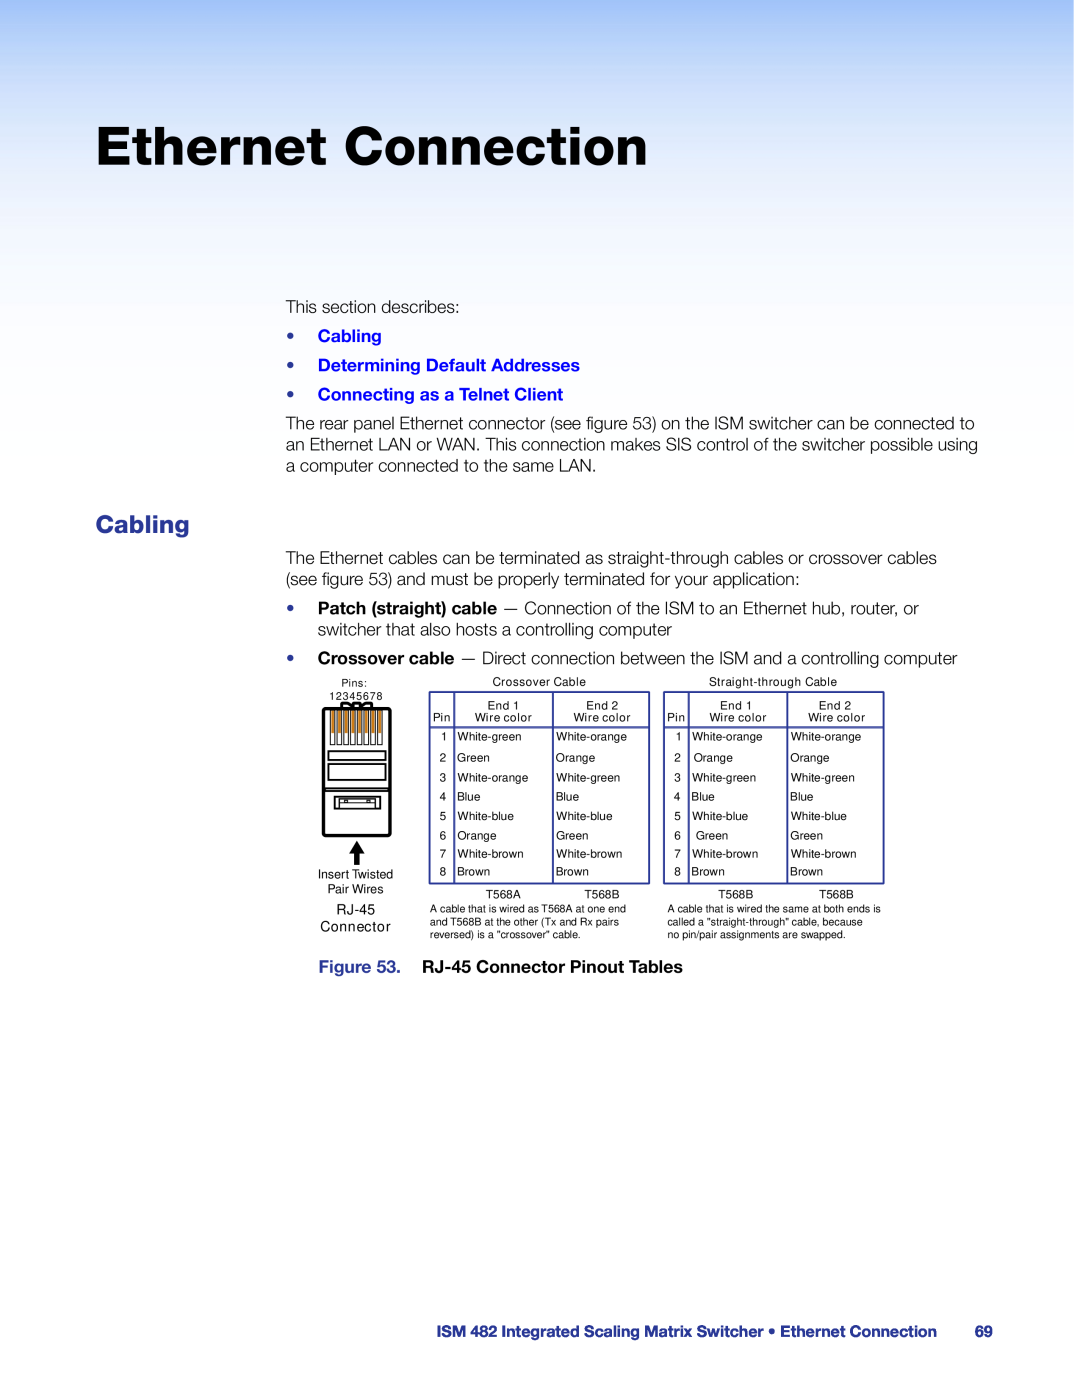 Extron electronic ISM 482 manual Ethernet Connection, Cabling, RJ-45 Connector Pinout Tables 